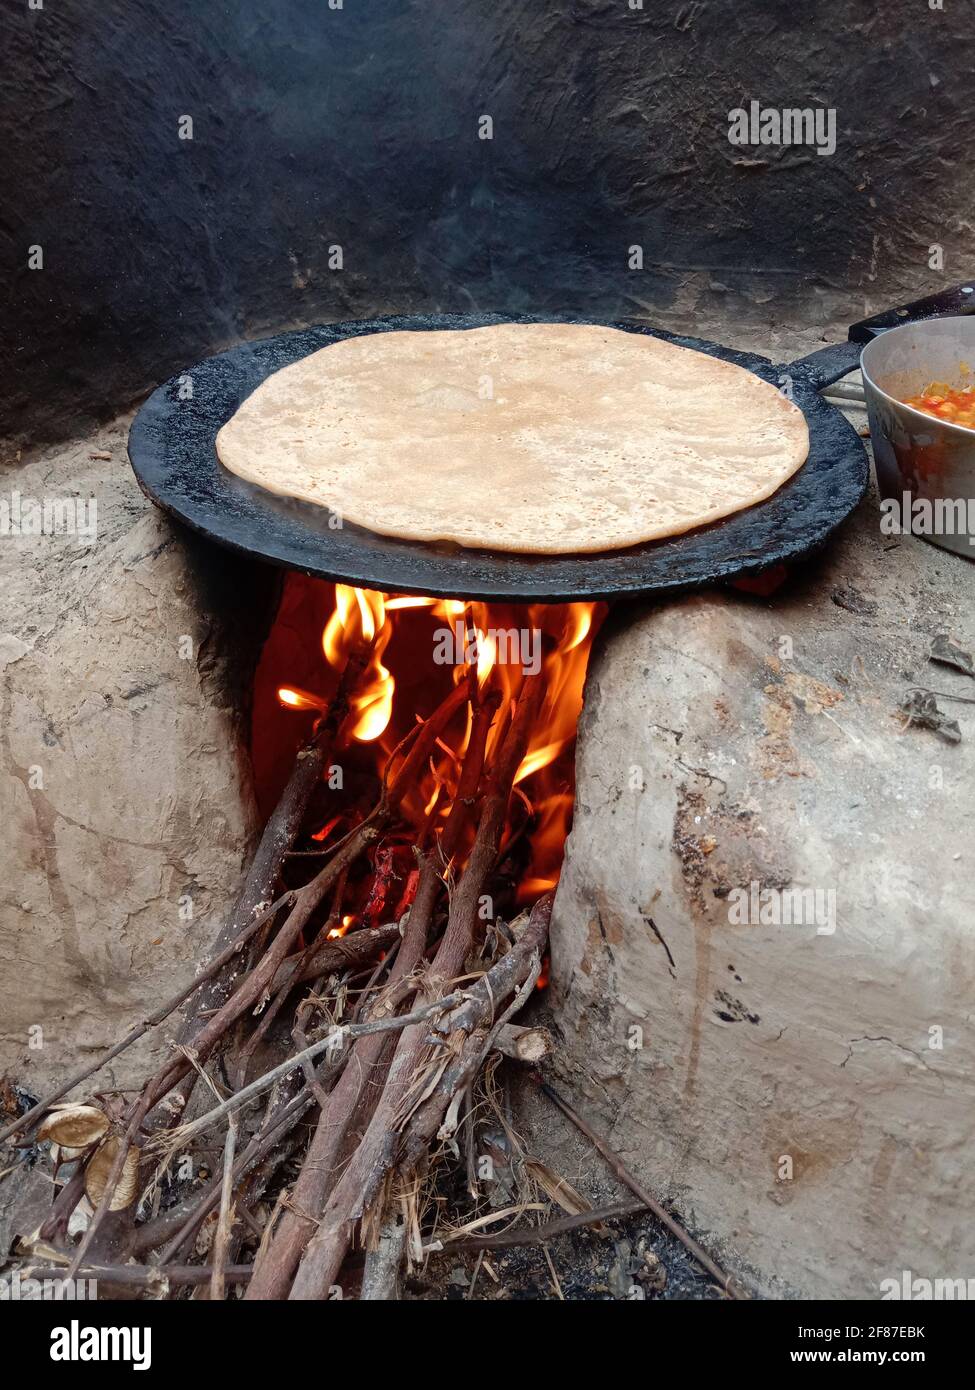 https://c8.alamy.com/comp/2F87EBK/wooden-fire-burning-in-hand-made-mud-stove-with-bread-roti-is-being-baked-on-desi-tawa-village-2F87EBK.jpg